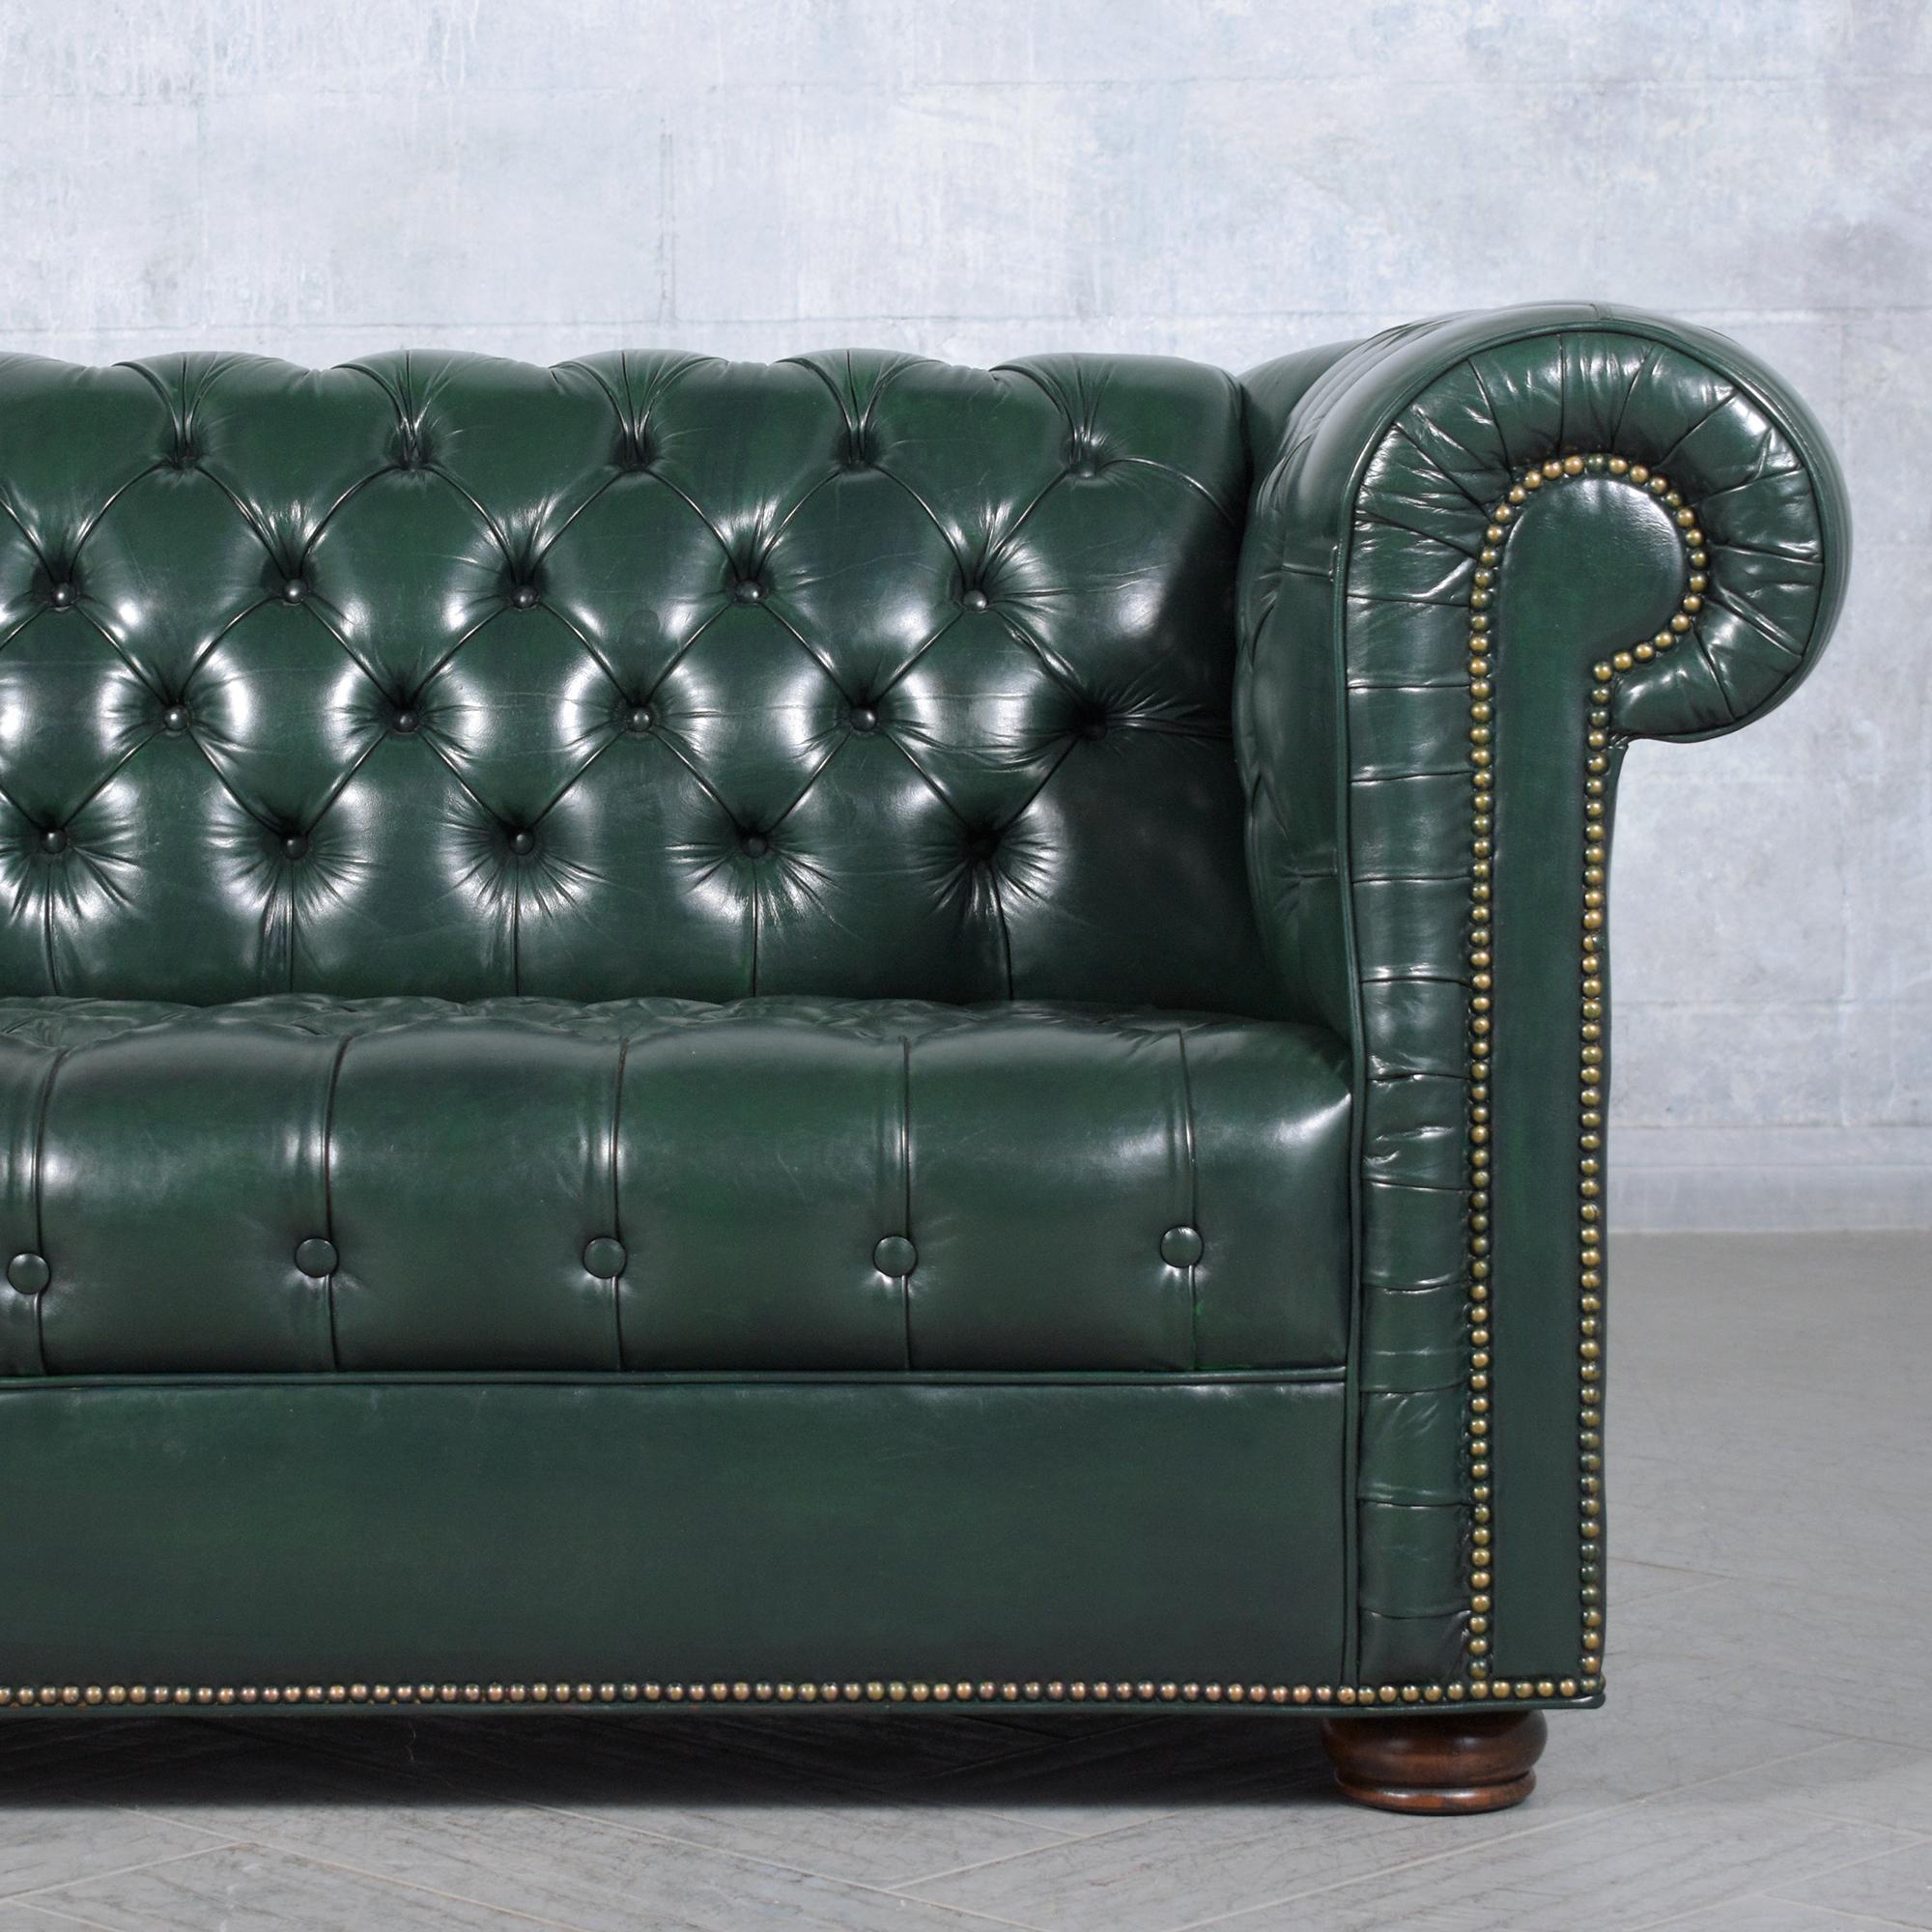 European 1970s Vintage Chesterfield Sofa: Emerald Green Leather with Elegant Carved Legs